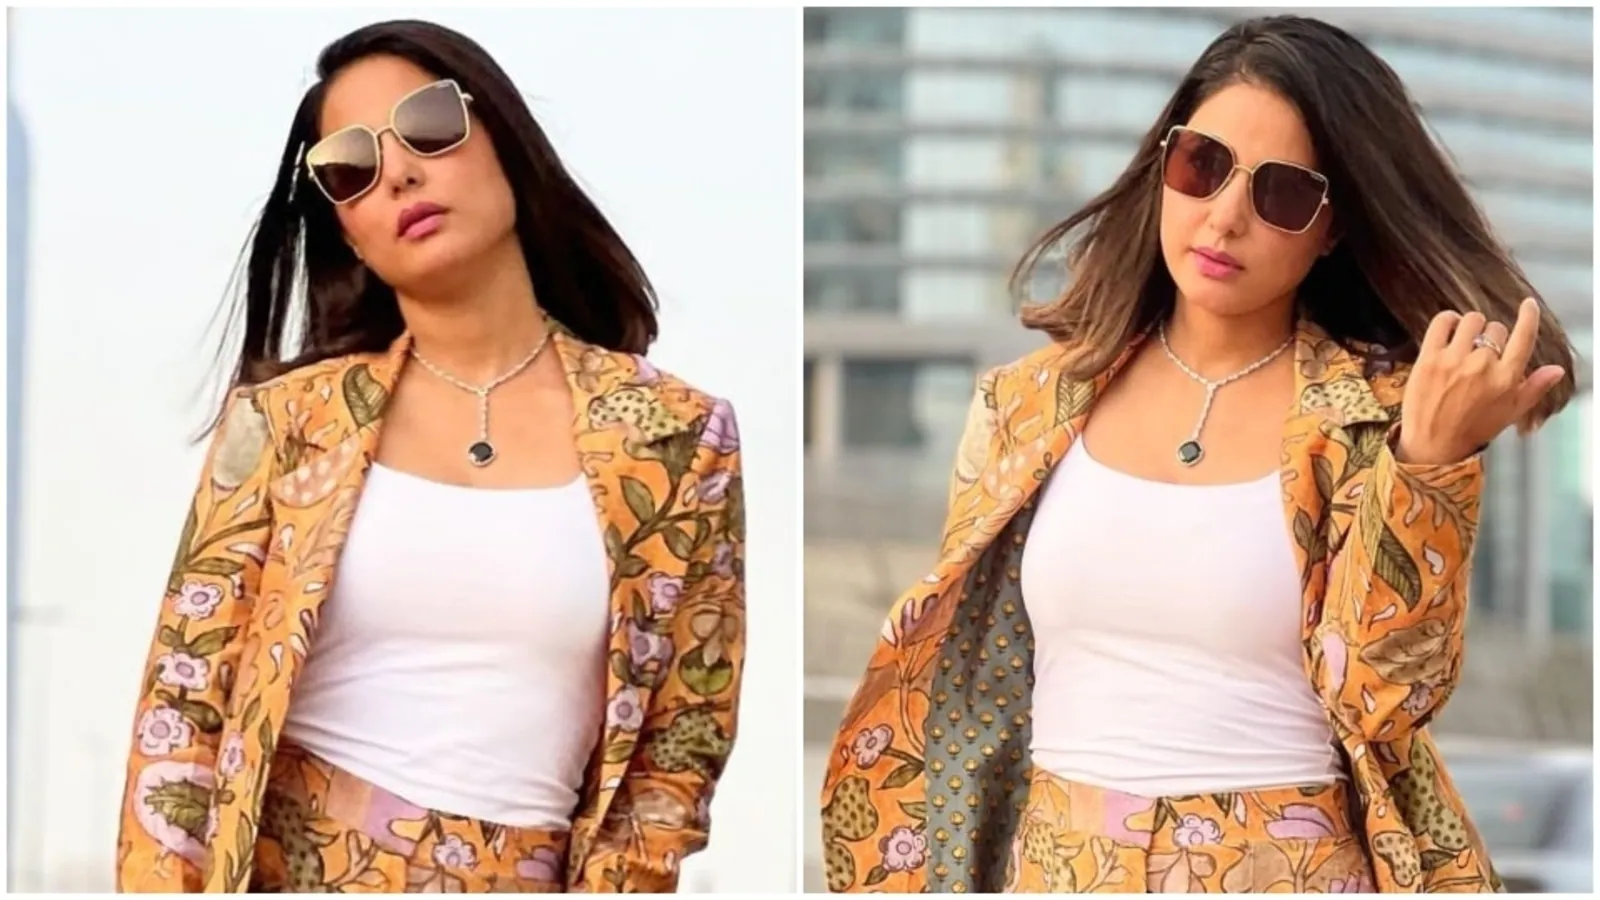 Hina Khan takes over Dubai in glamorous floral powersuit, enjoys cruise date with family: Check it out here